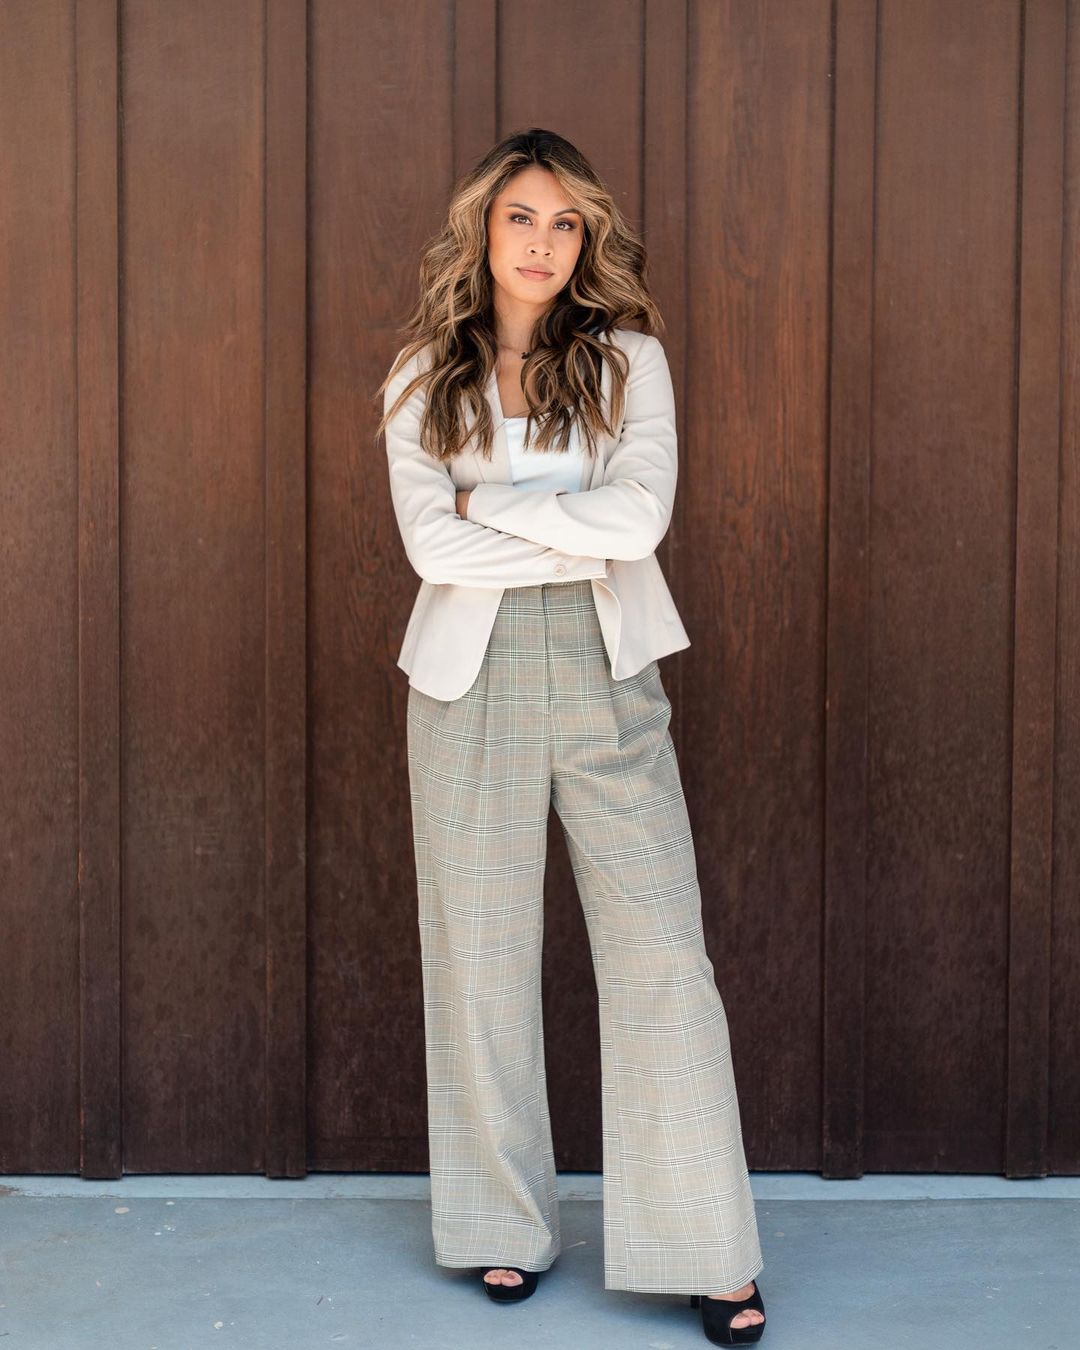 Ashley's Classy Look In  White Color Top Paired With Suit-Pant